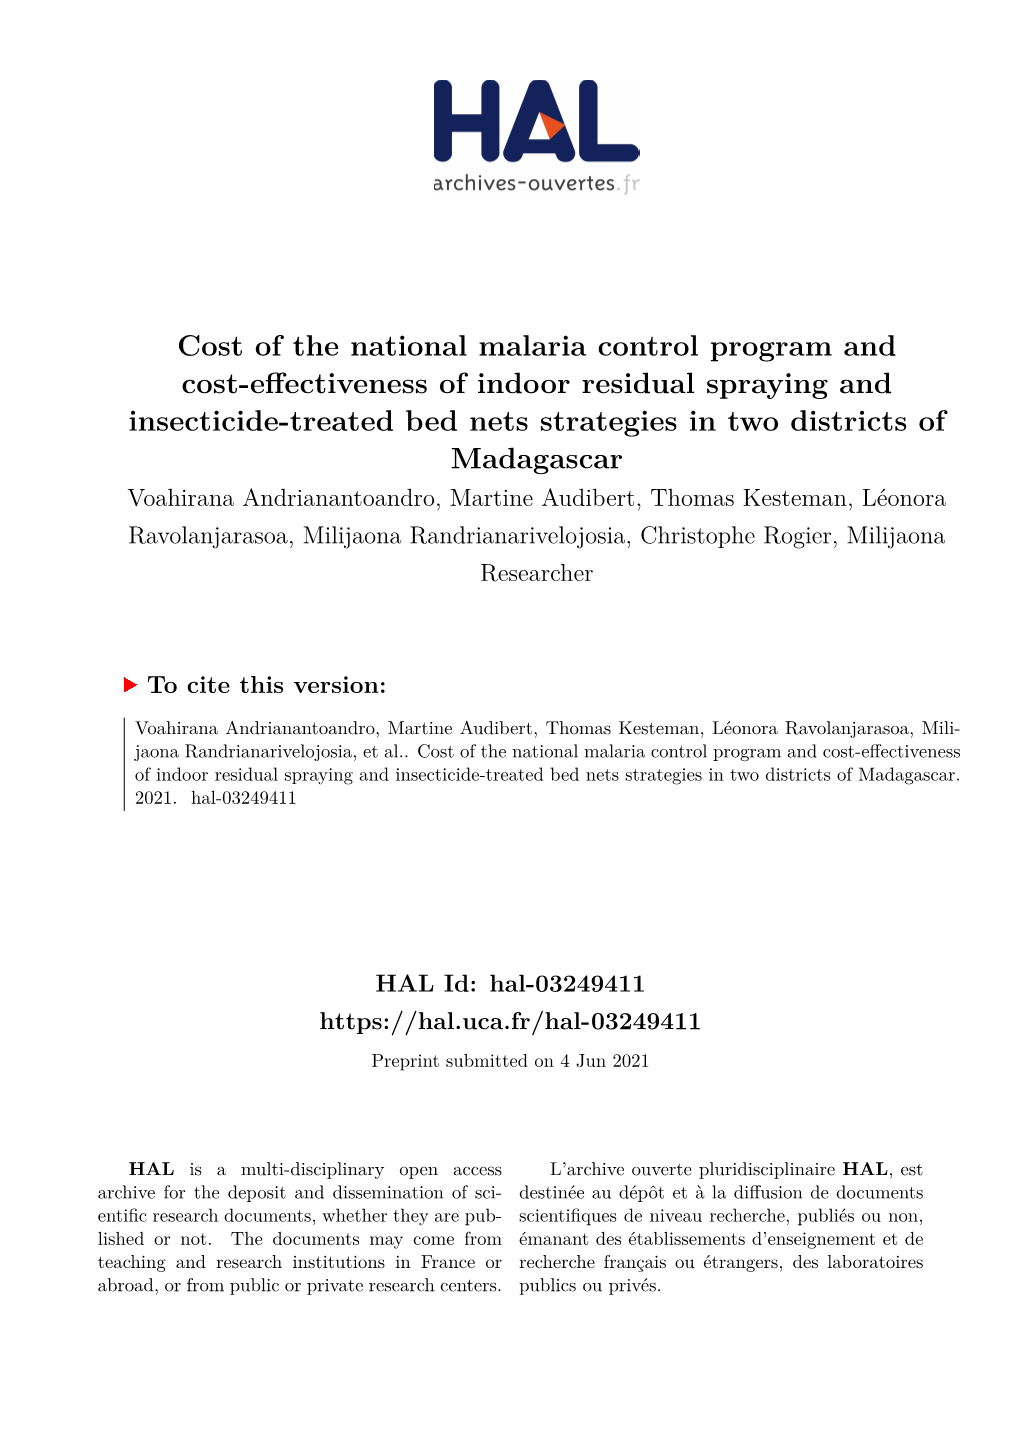 Cost of the National Malaria Control Program and Cost-Effectiveness Of